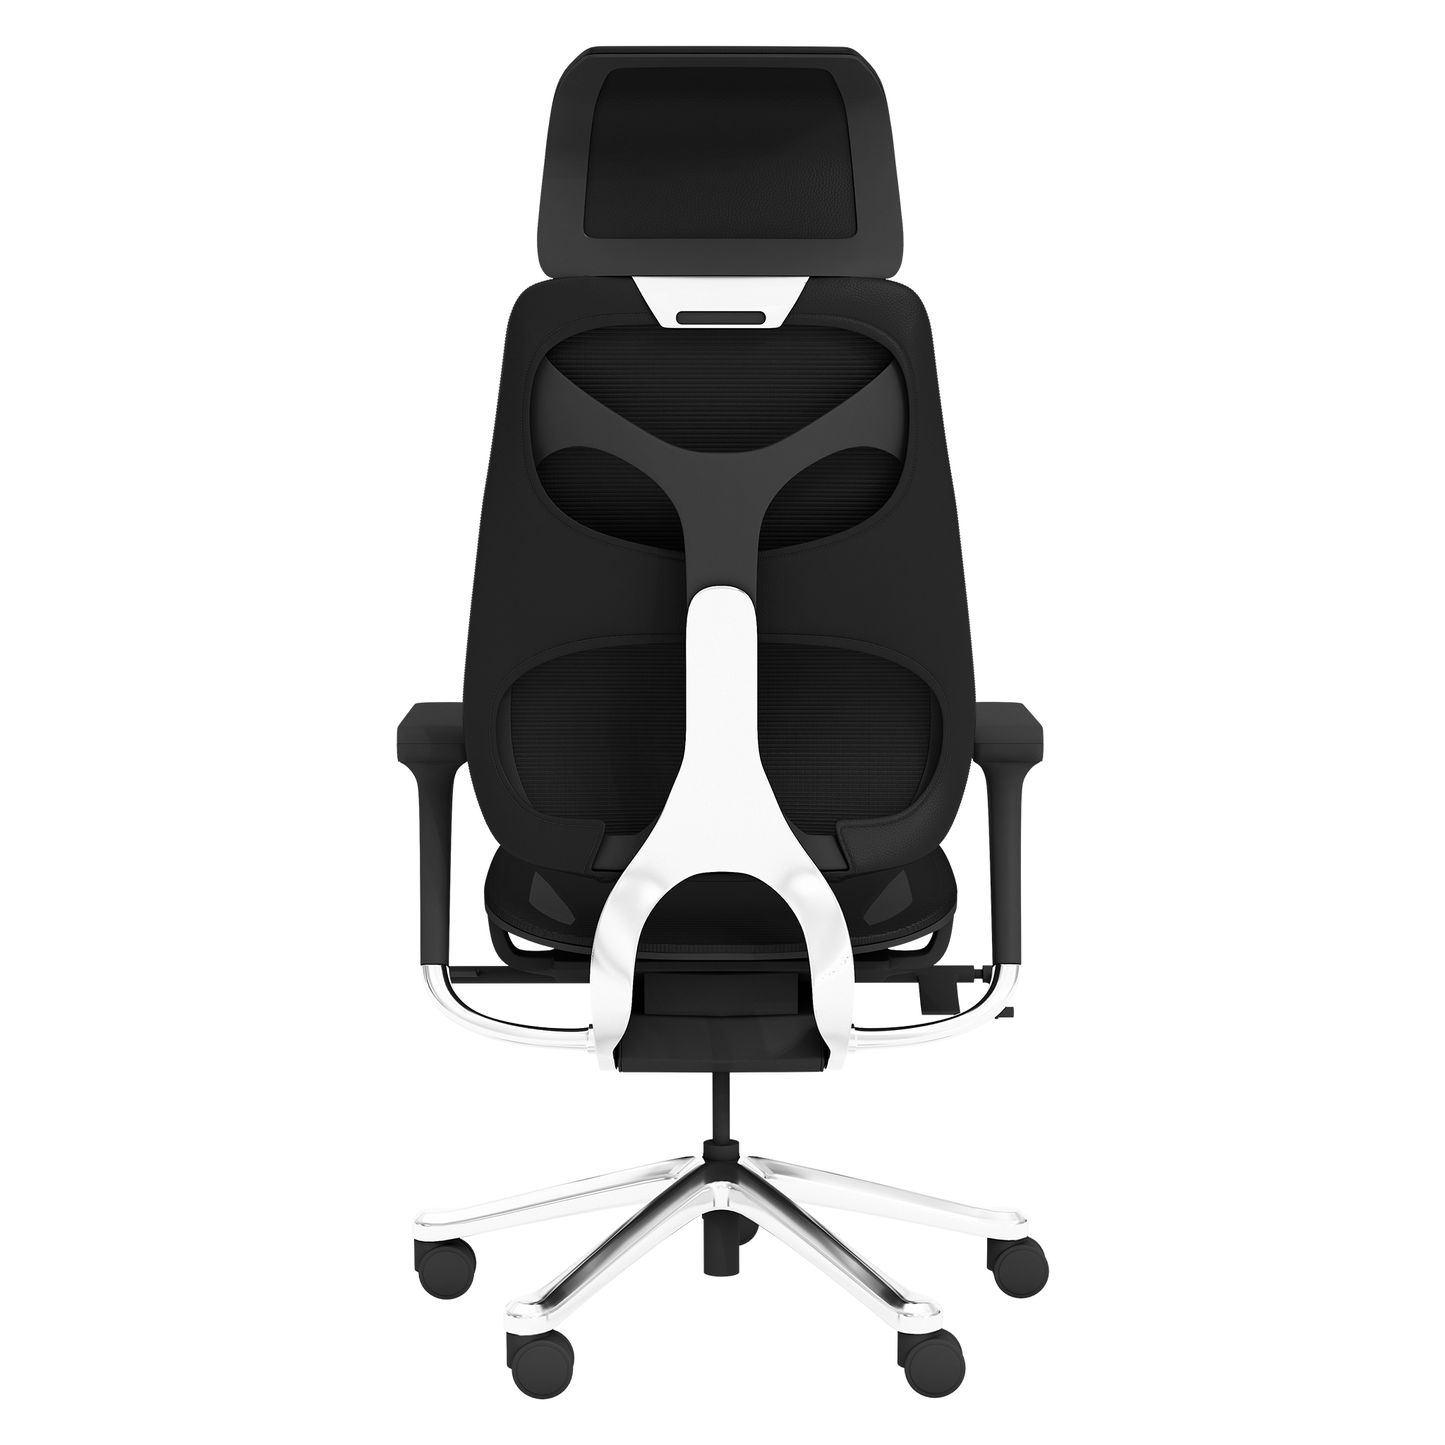 PhantomX Mesh Gaming Chair with Philadelphia 76ers GC All White [CAN ONLY BE SHIPPED TO PENNSYLVANIA]